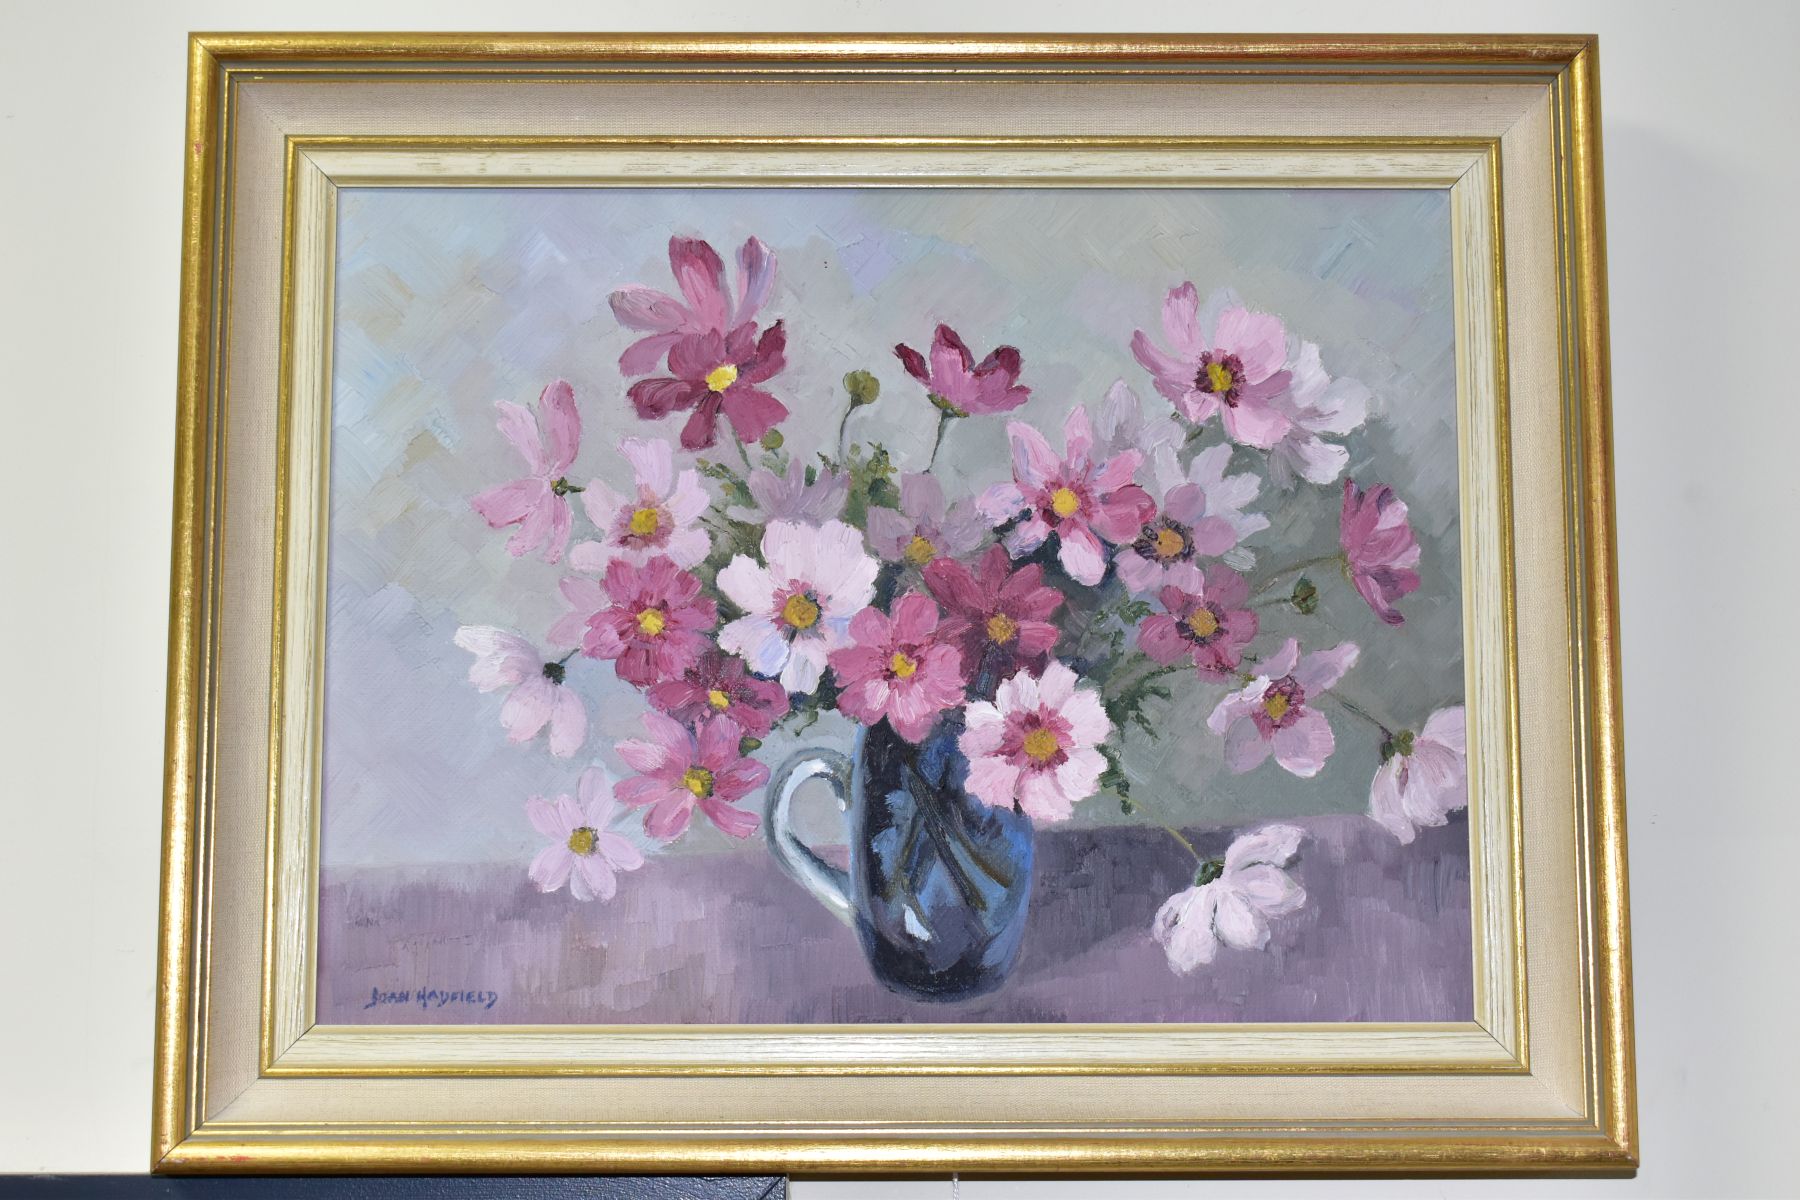 JOAN HADFIELD (20TH CENTURY), two oil on canvas flower studies, the first depicts daffodils and - Image 2 of 5